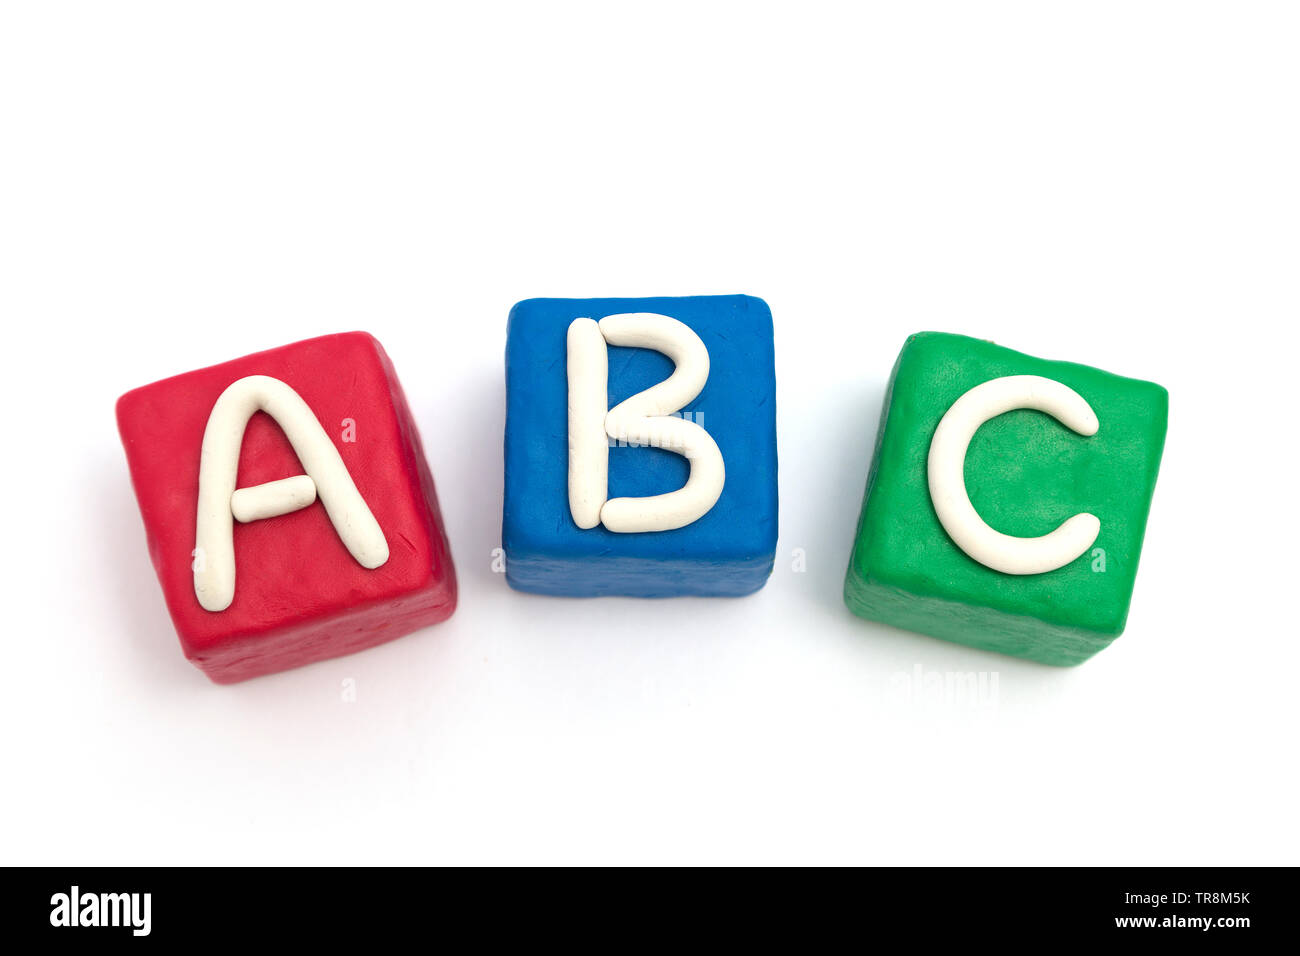 Blocks made of modeling clay with letters A B C, isolated Stock Photo